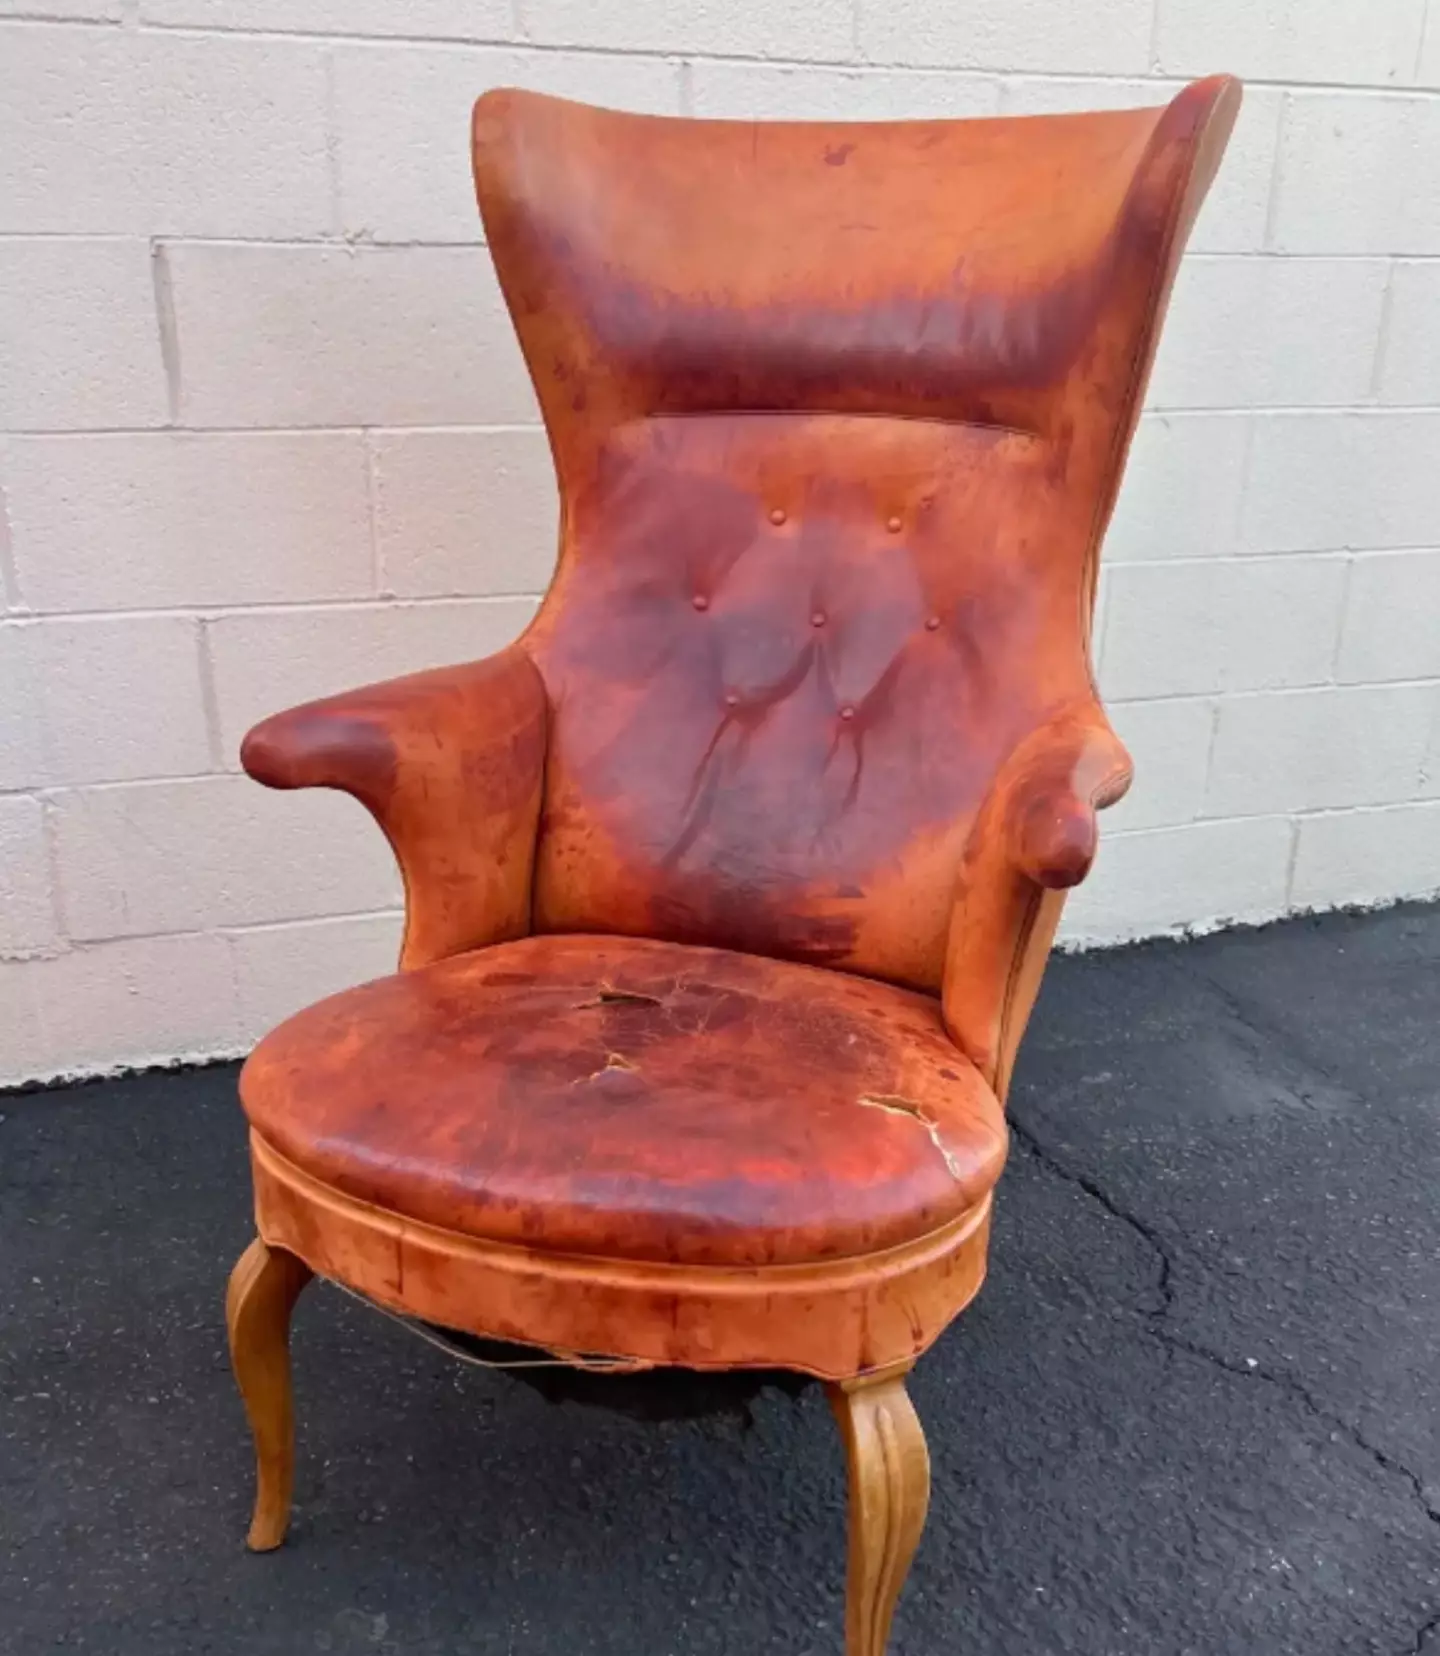 Justin Miller picked this chair up on Facebook Marketplace for $50.